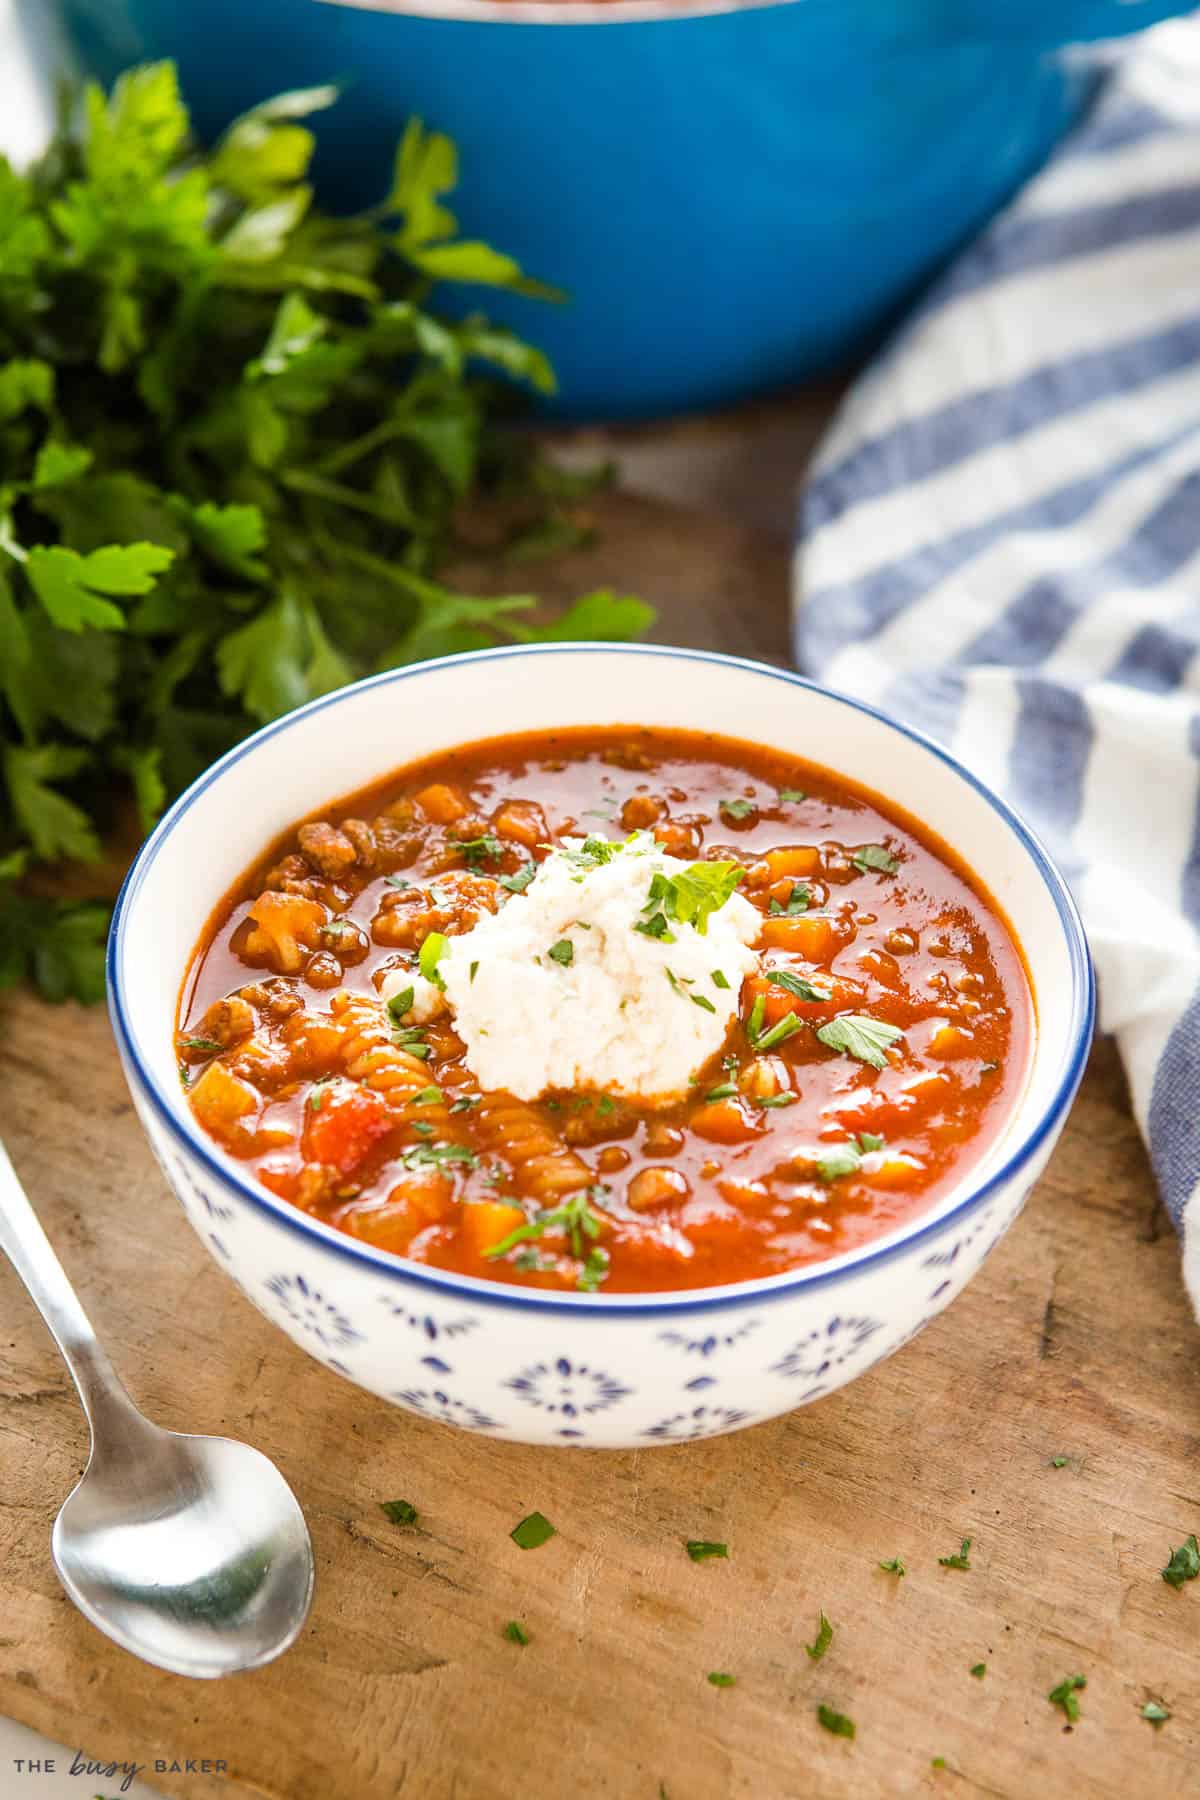 Italian-style tomato soup with beef and pasta in 